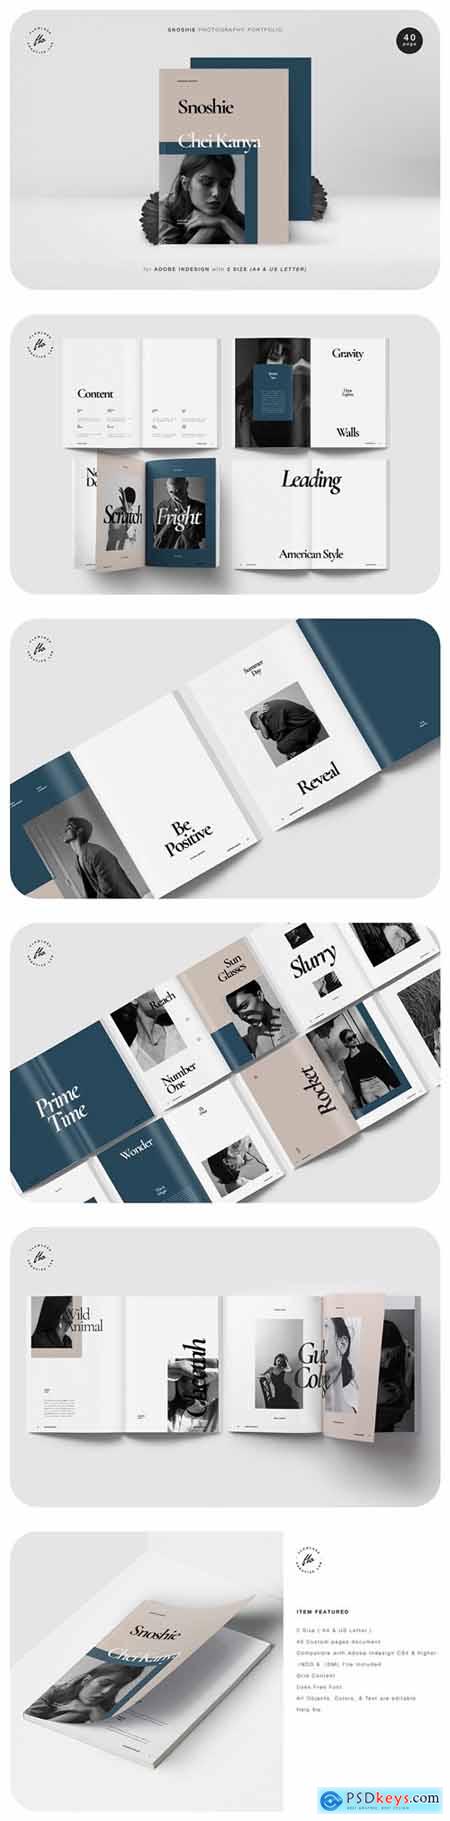 Indesign » page 166 » Free Download Photoshop Vector Stock image Via ...